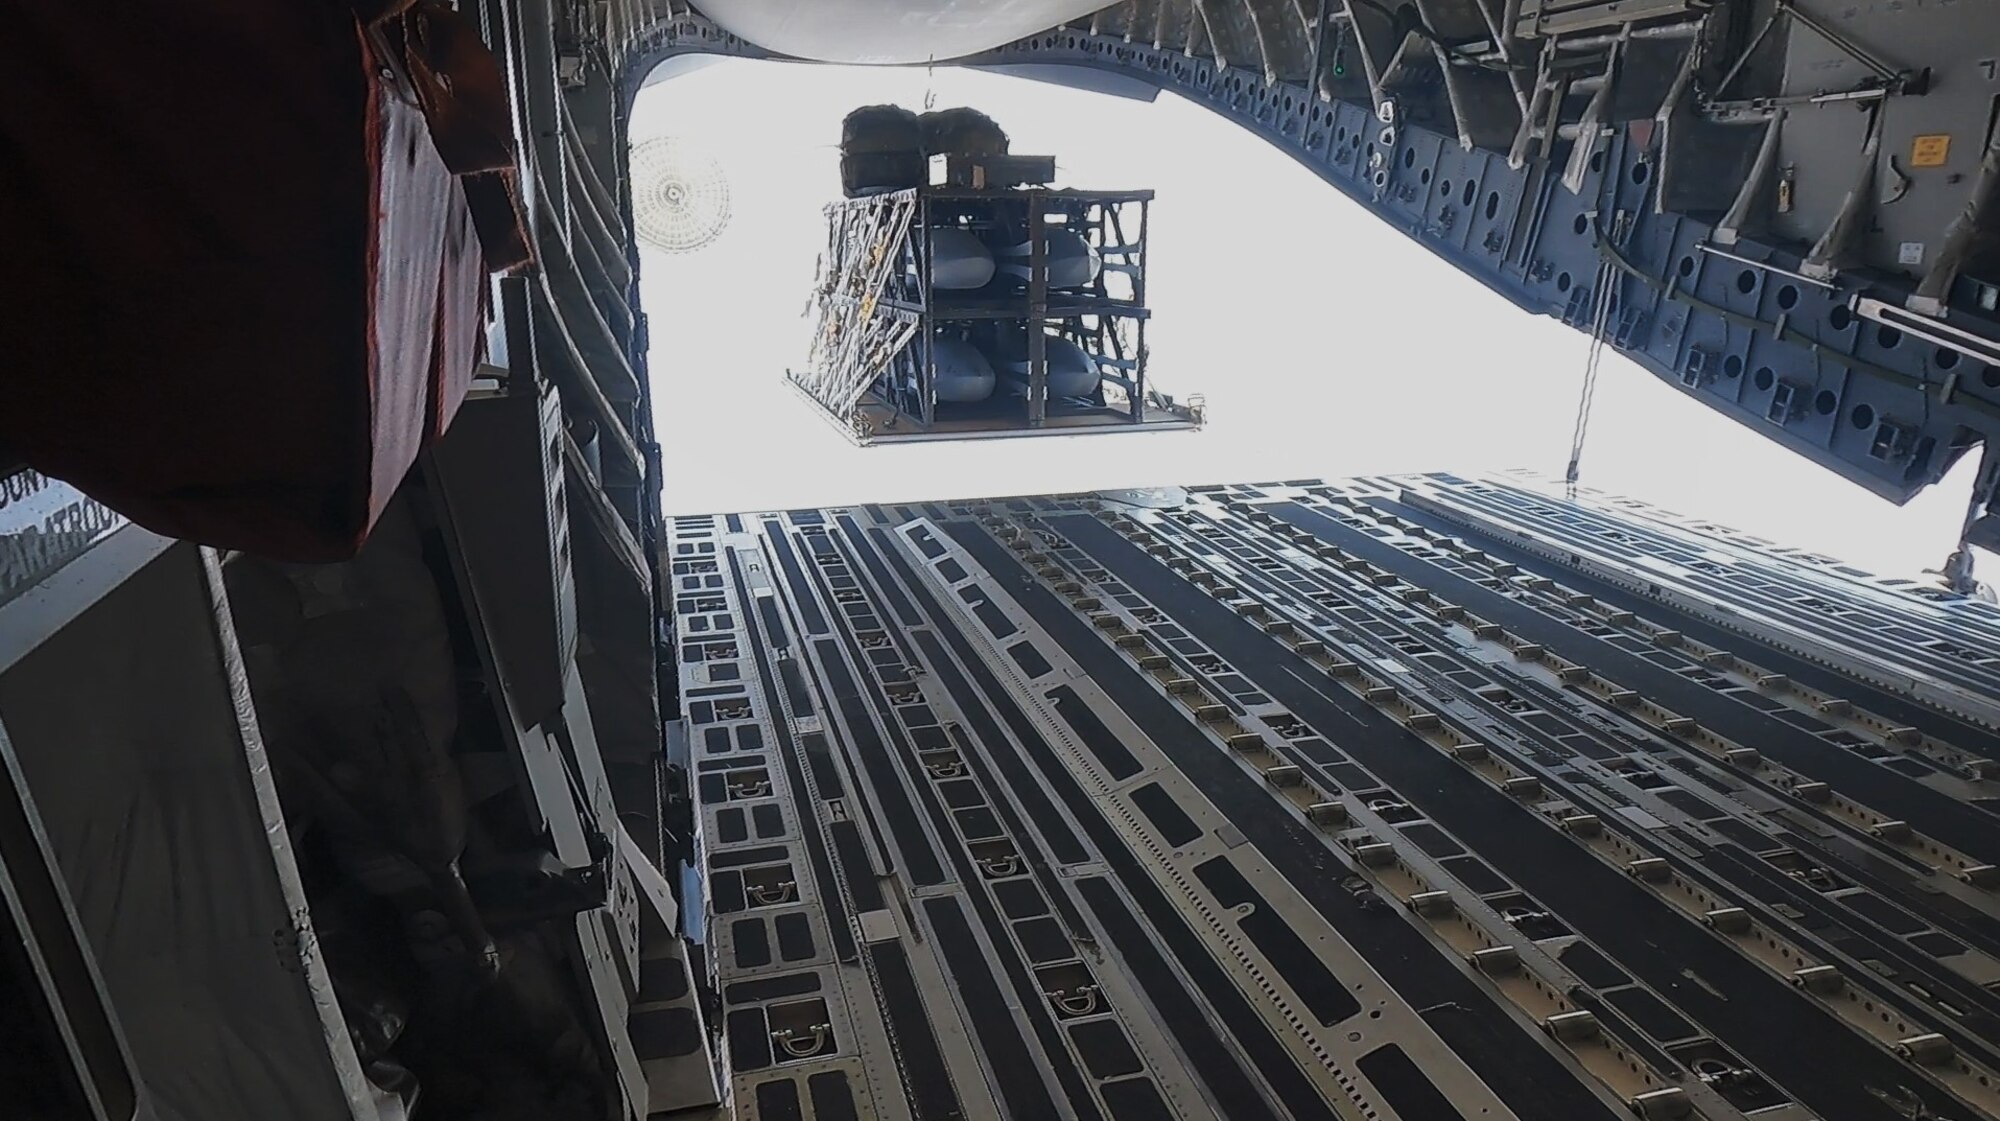 A standard cargo airdrop of the Palletized Munition Deployment System from a C-17A. A 4-pack configuration is used for demonstration purposes. (Courtesy photo)